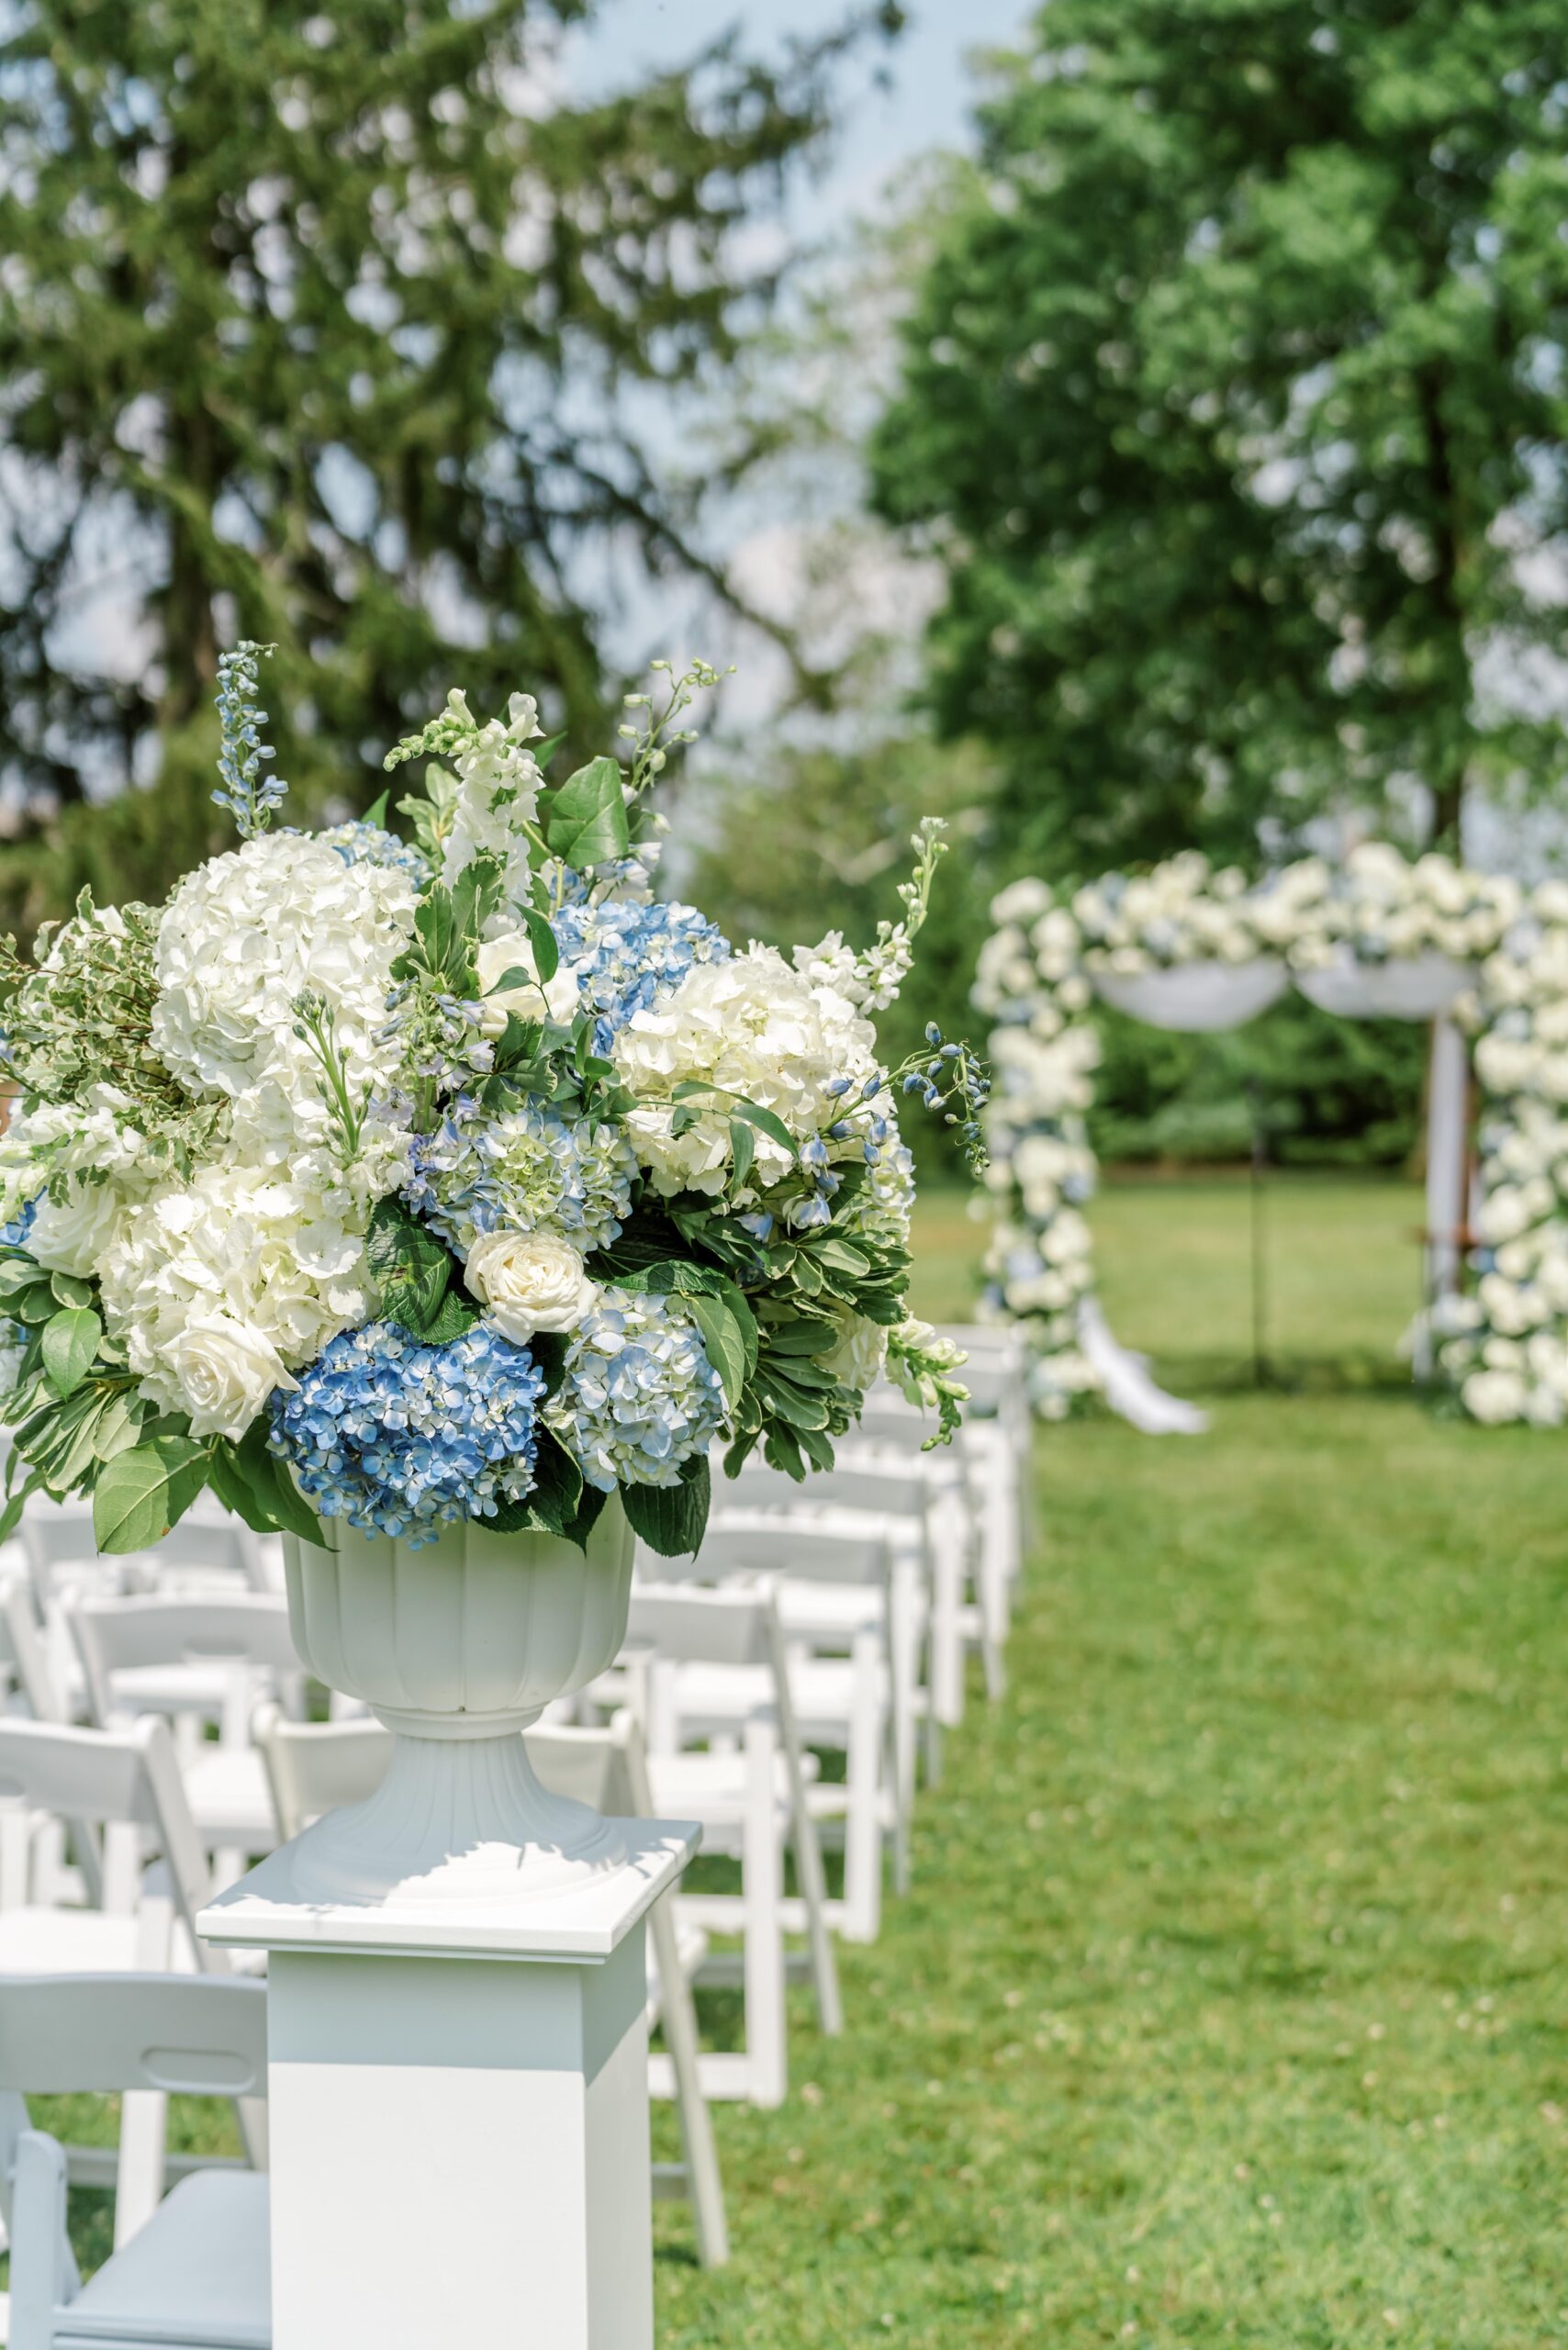 Blue and white hydrangeas at the outdoor wedding ceremony